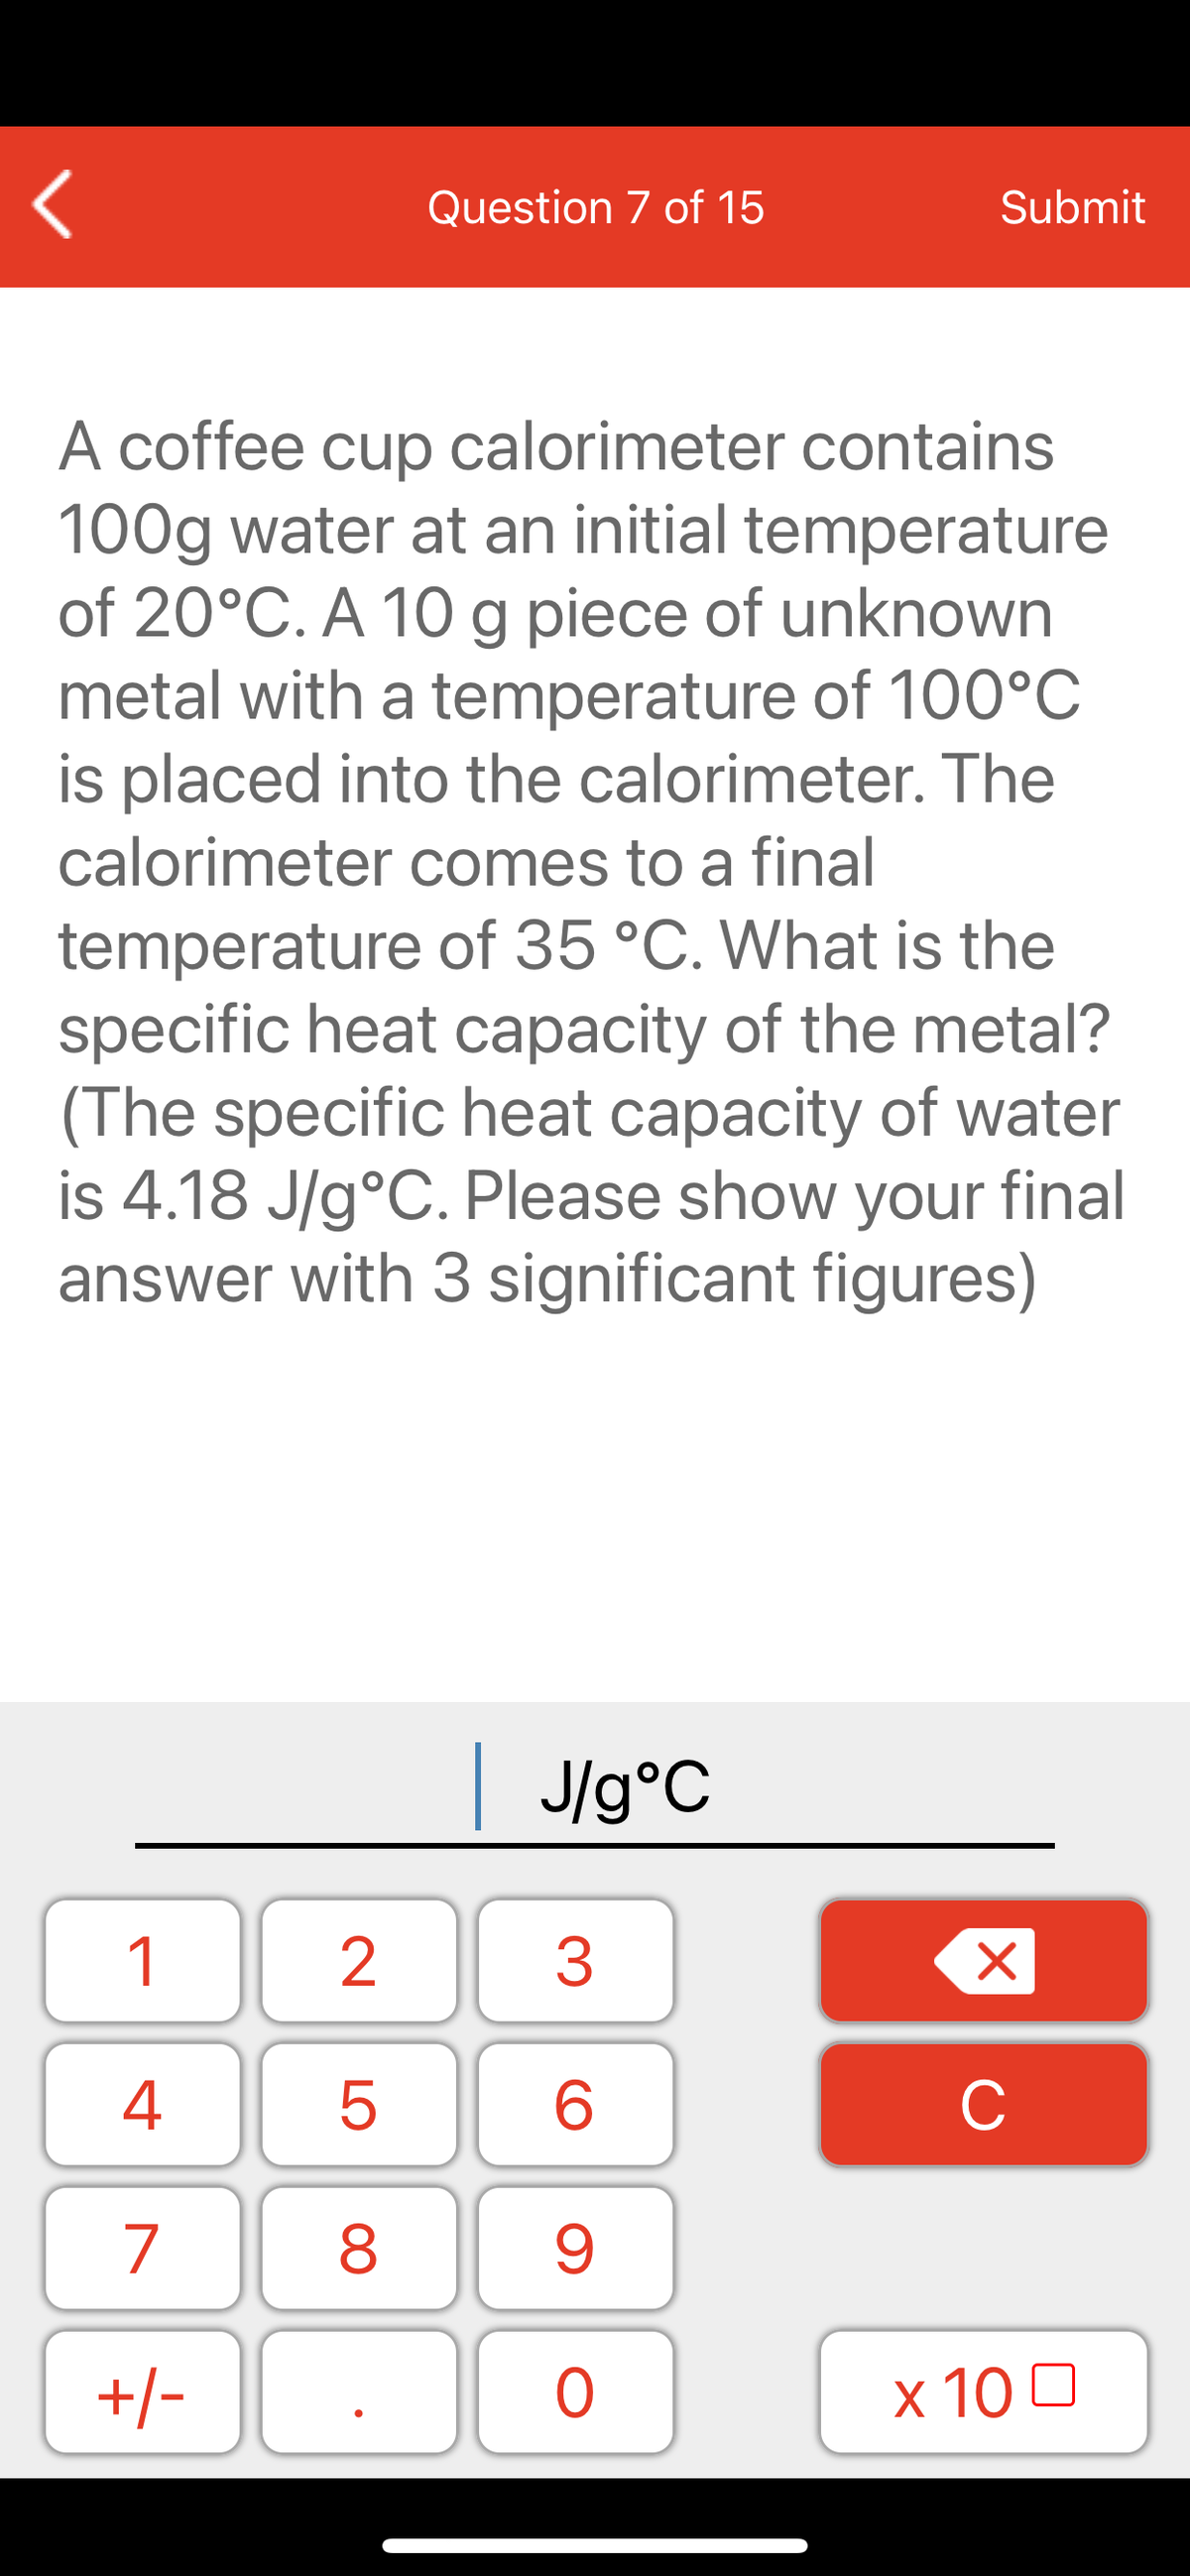 Question 7 of 15
Submit
A coffee cup calorimeter contains
100g water at an initial temperature
of 20°C. A 10 g piece of unknown
metal with a temperature of 100°C
is placed into the calorimeter. The
calorimeter comes to a final
temperature of 35 °C. What is the
specific heat capacity of the metal?
(The specific heat capacity of water
is 4.18 J/g°C. Please show your final
answer with 3 significant figures)
| J/g°C
1
2
3
C
7
9.
+/-
x 10 0
LO
00
